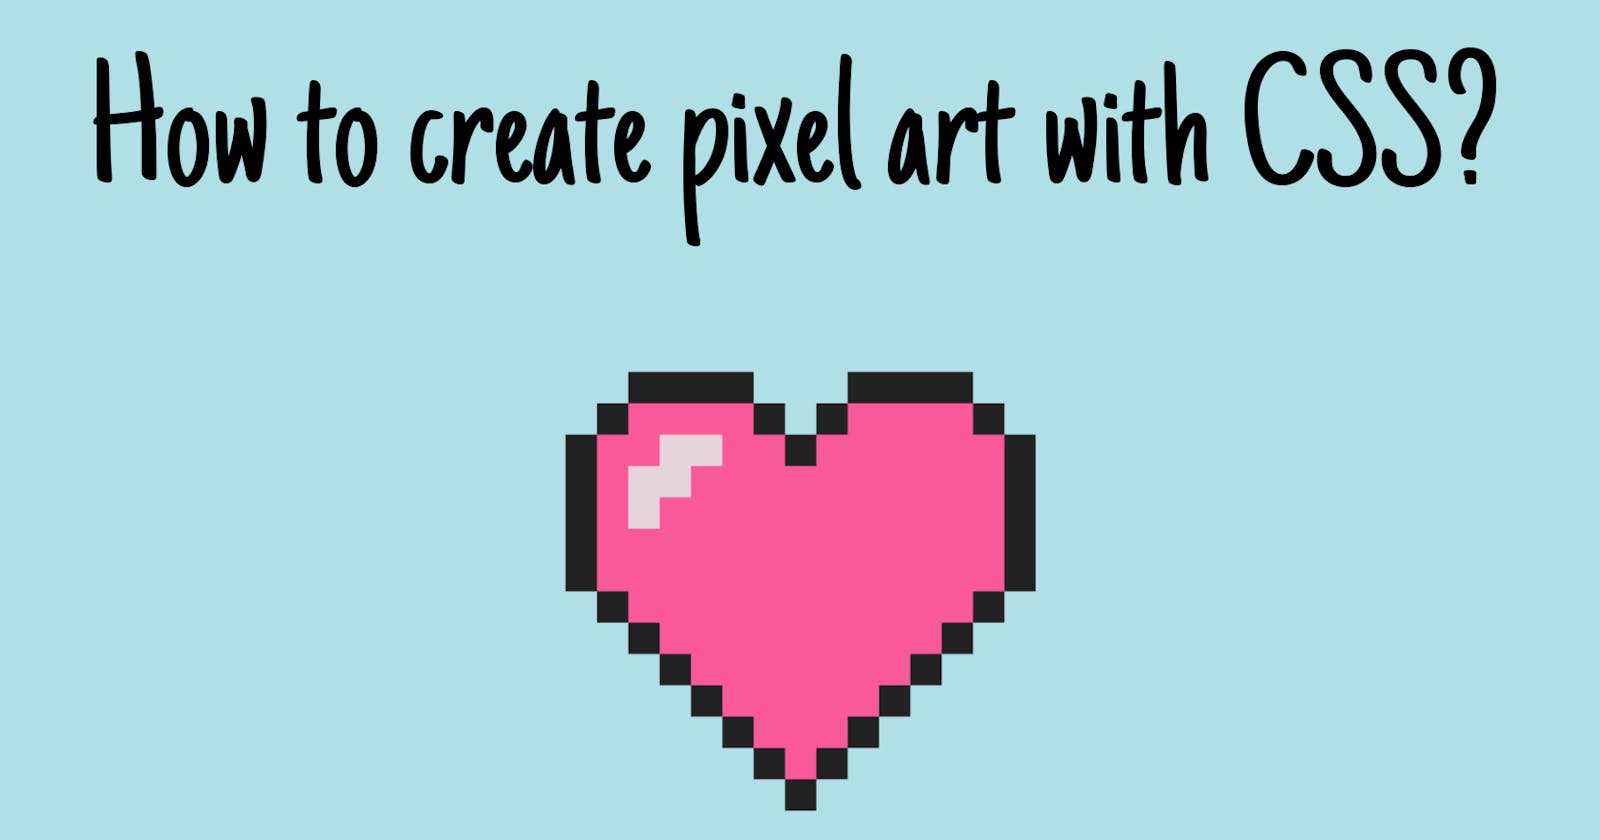 How to create pixel art with CSS?